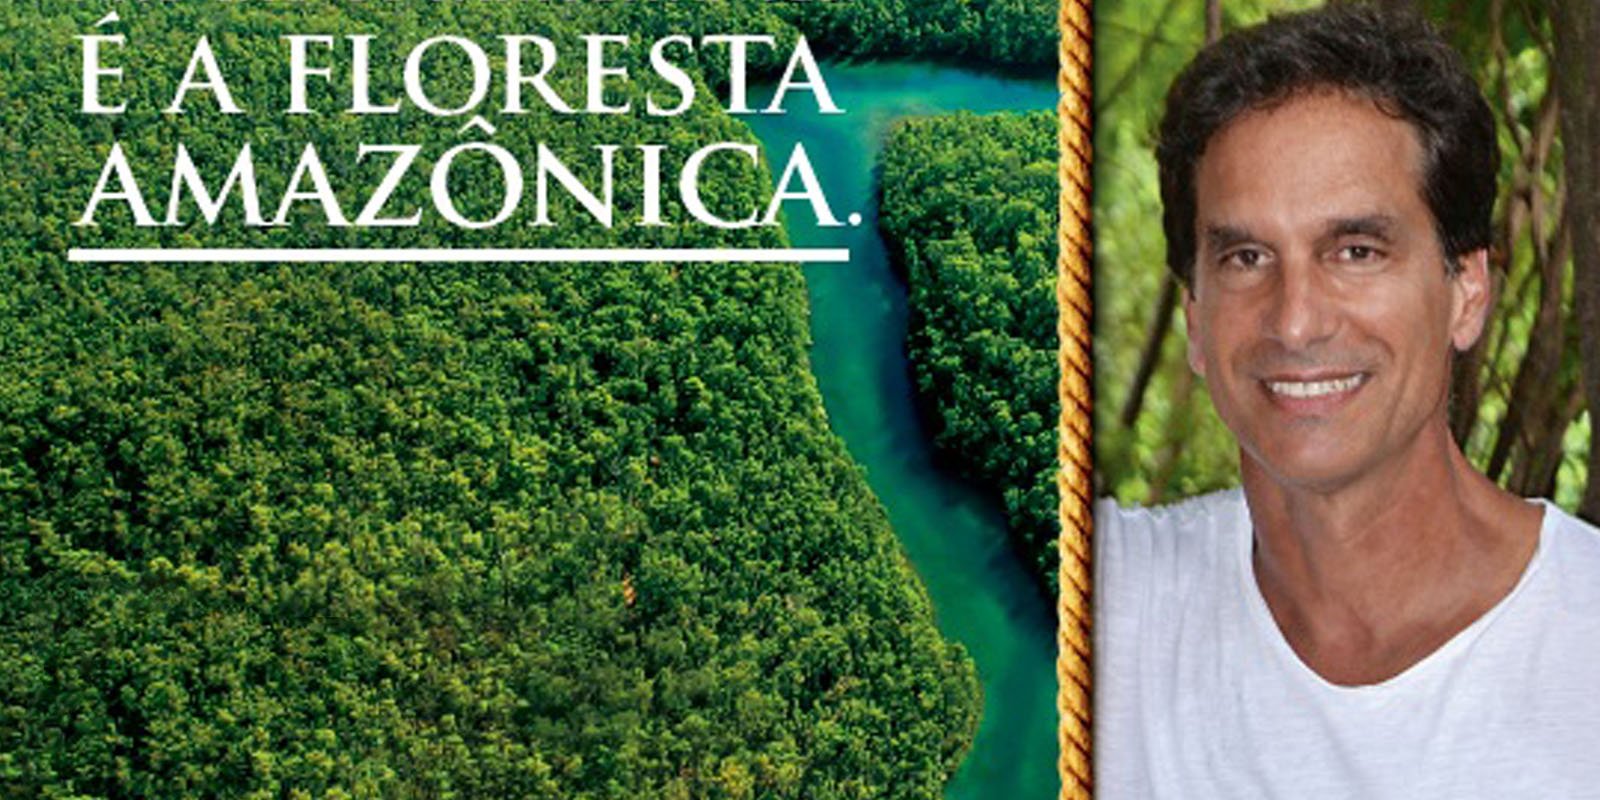 Featured image for “Amazônia”